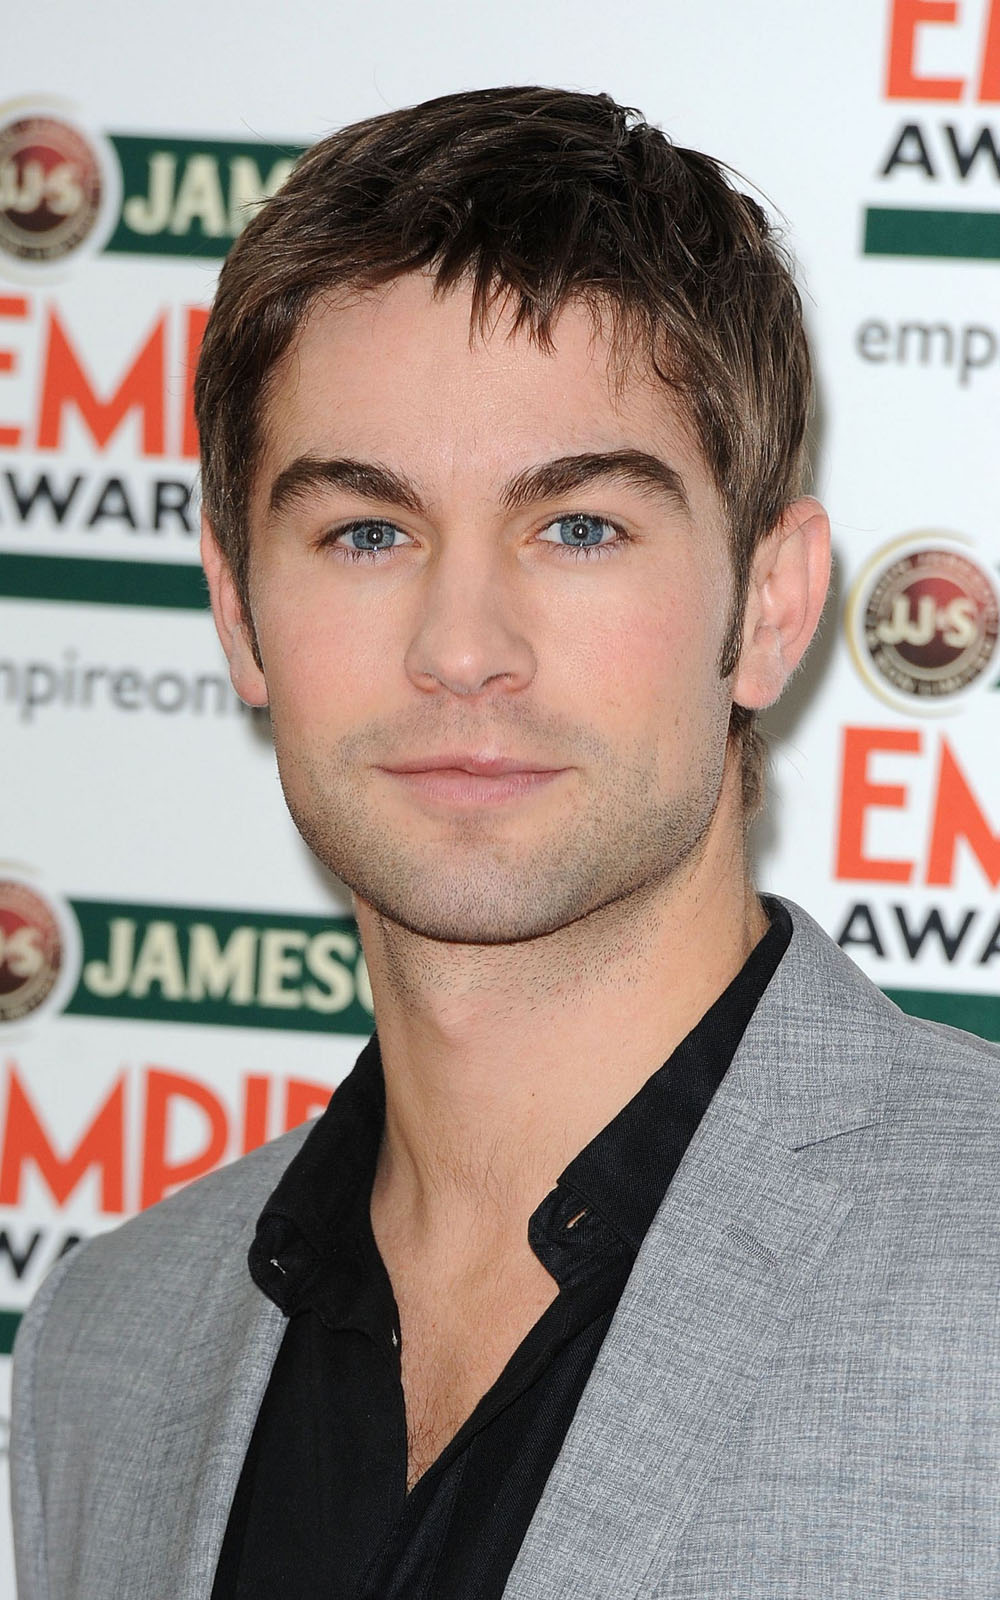 Chace Crawford Wallpaper